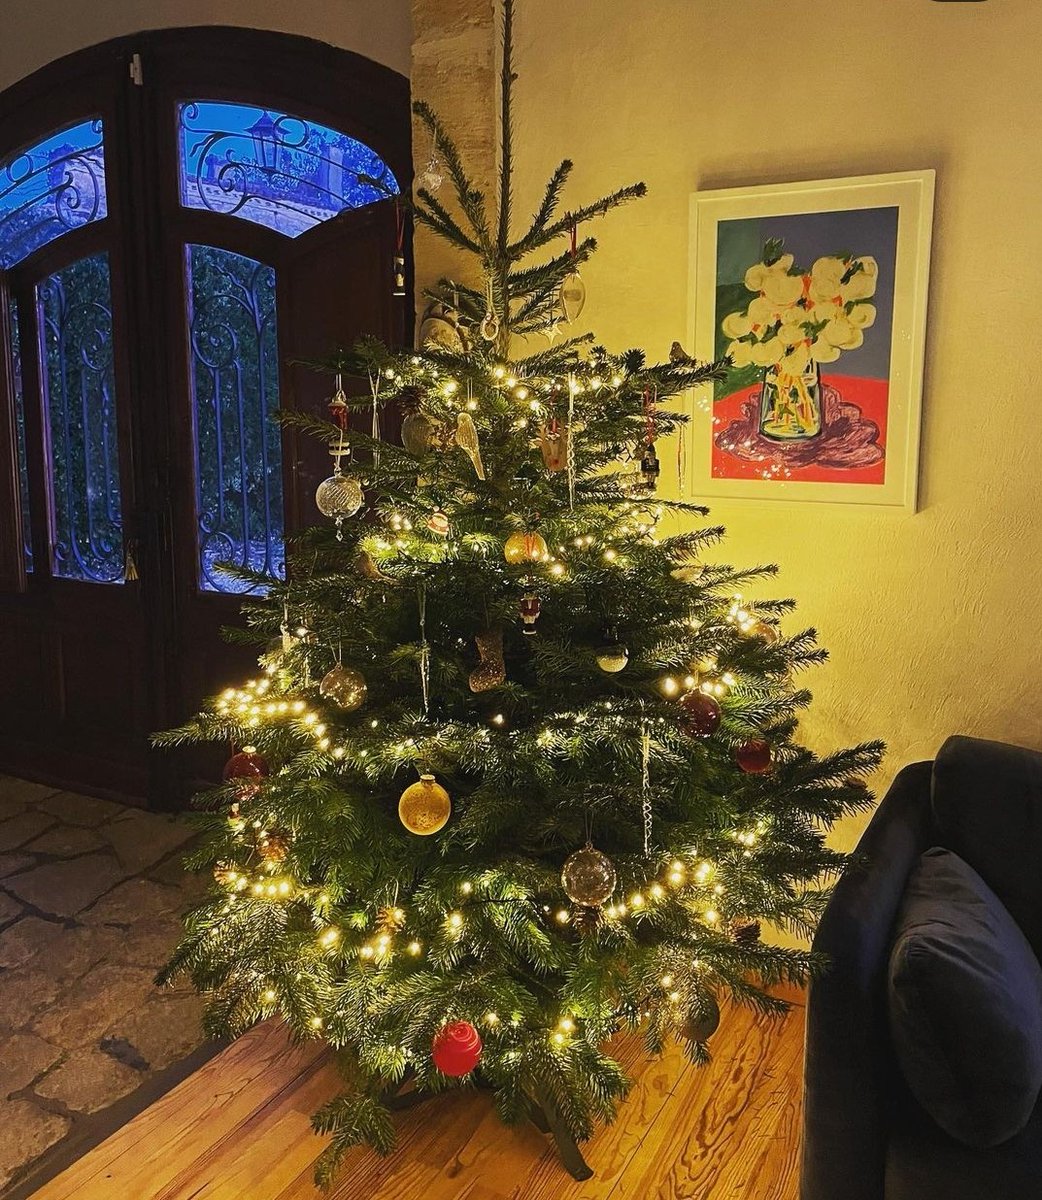 Always happy to see my art in collectors homes 😍#artcollector #home #artist #painter #tamarajare #artwork #christmastree #wallart #artistsontwitter #contemporaryart #artcollectors #collectorsofart #collectingart #fineart #painting #christmas2022